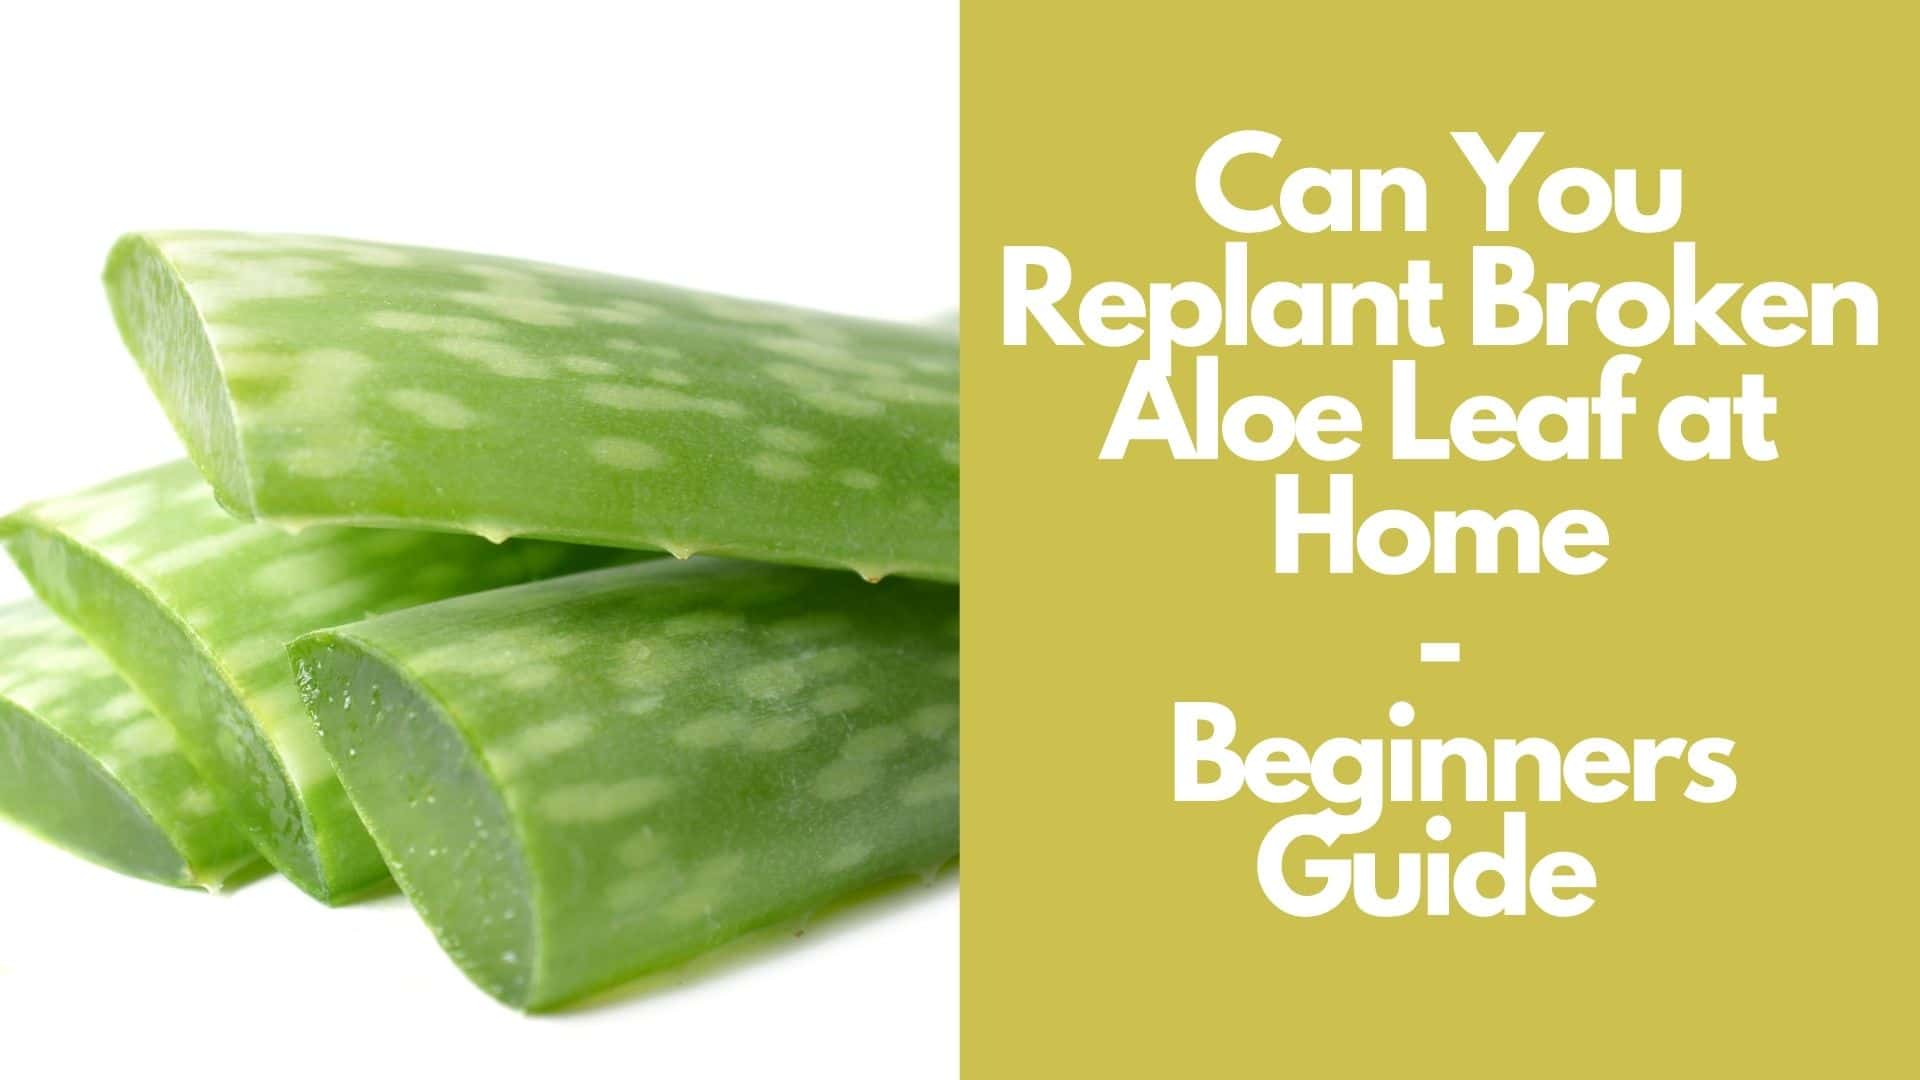 Can You Replant Broken Aloe Leaf at Home: Beginners Guide